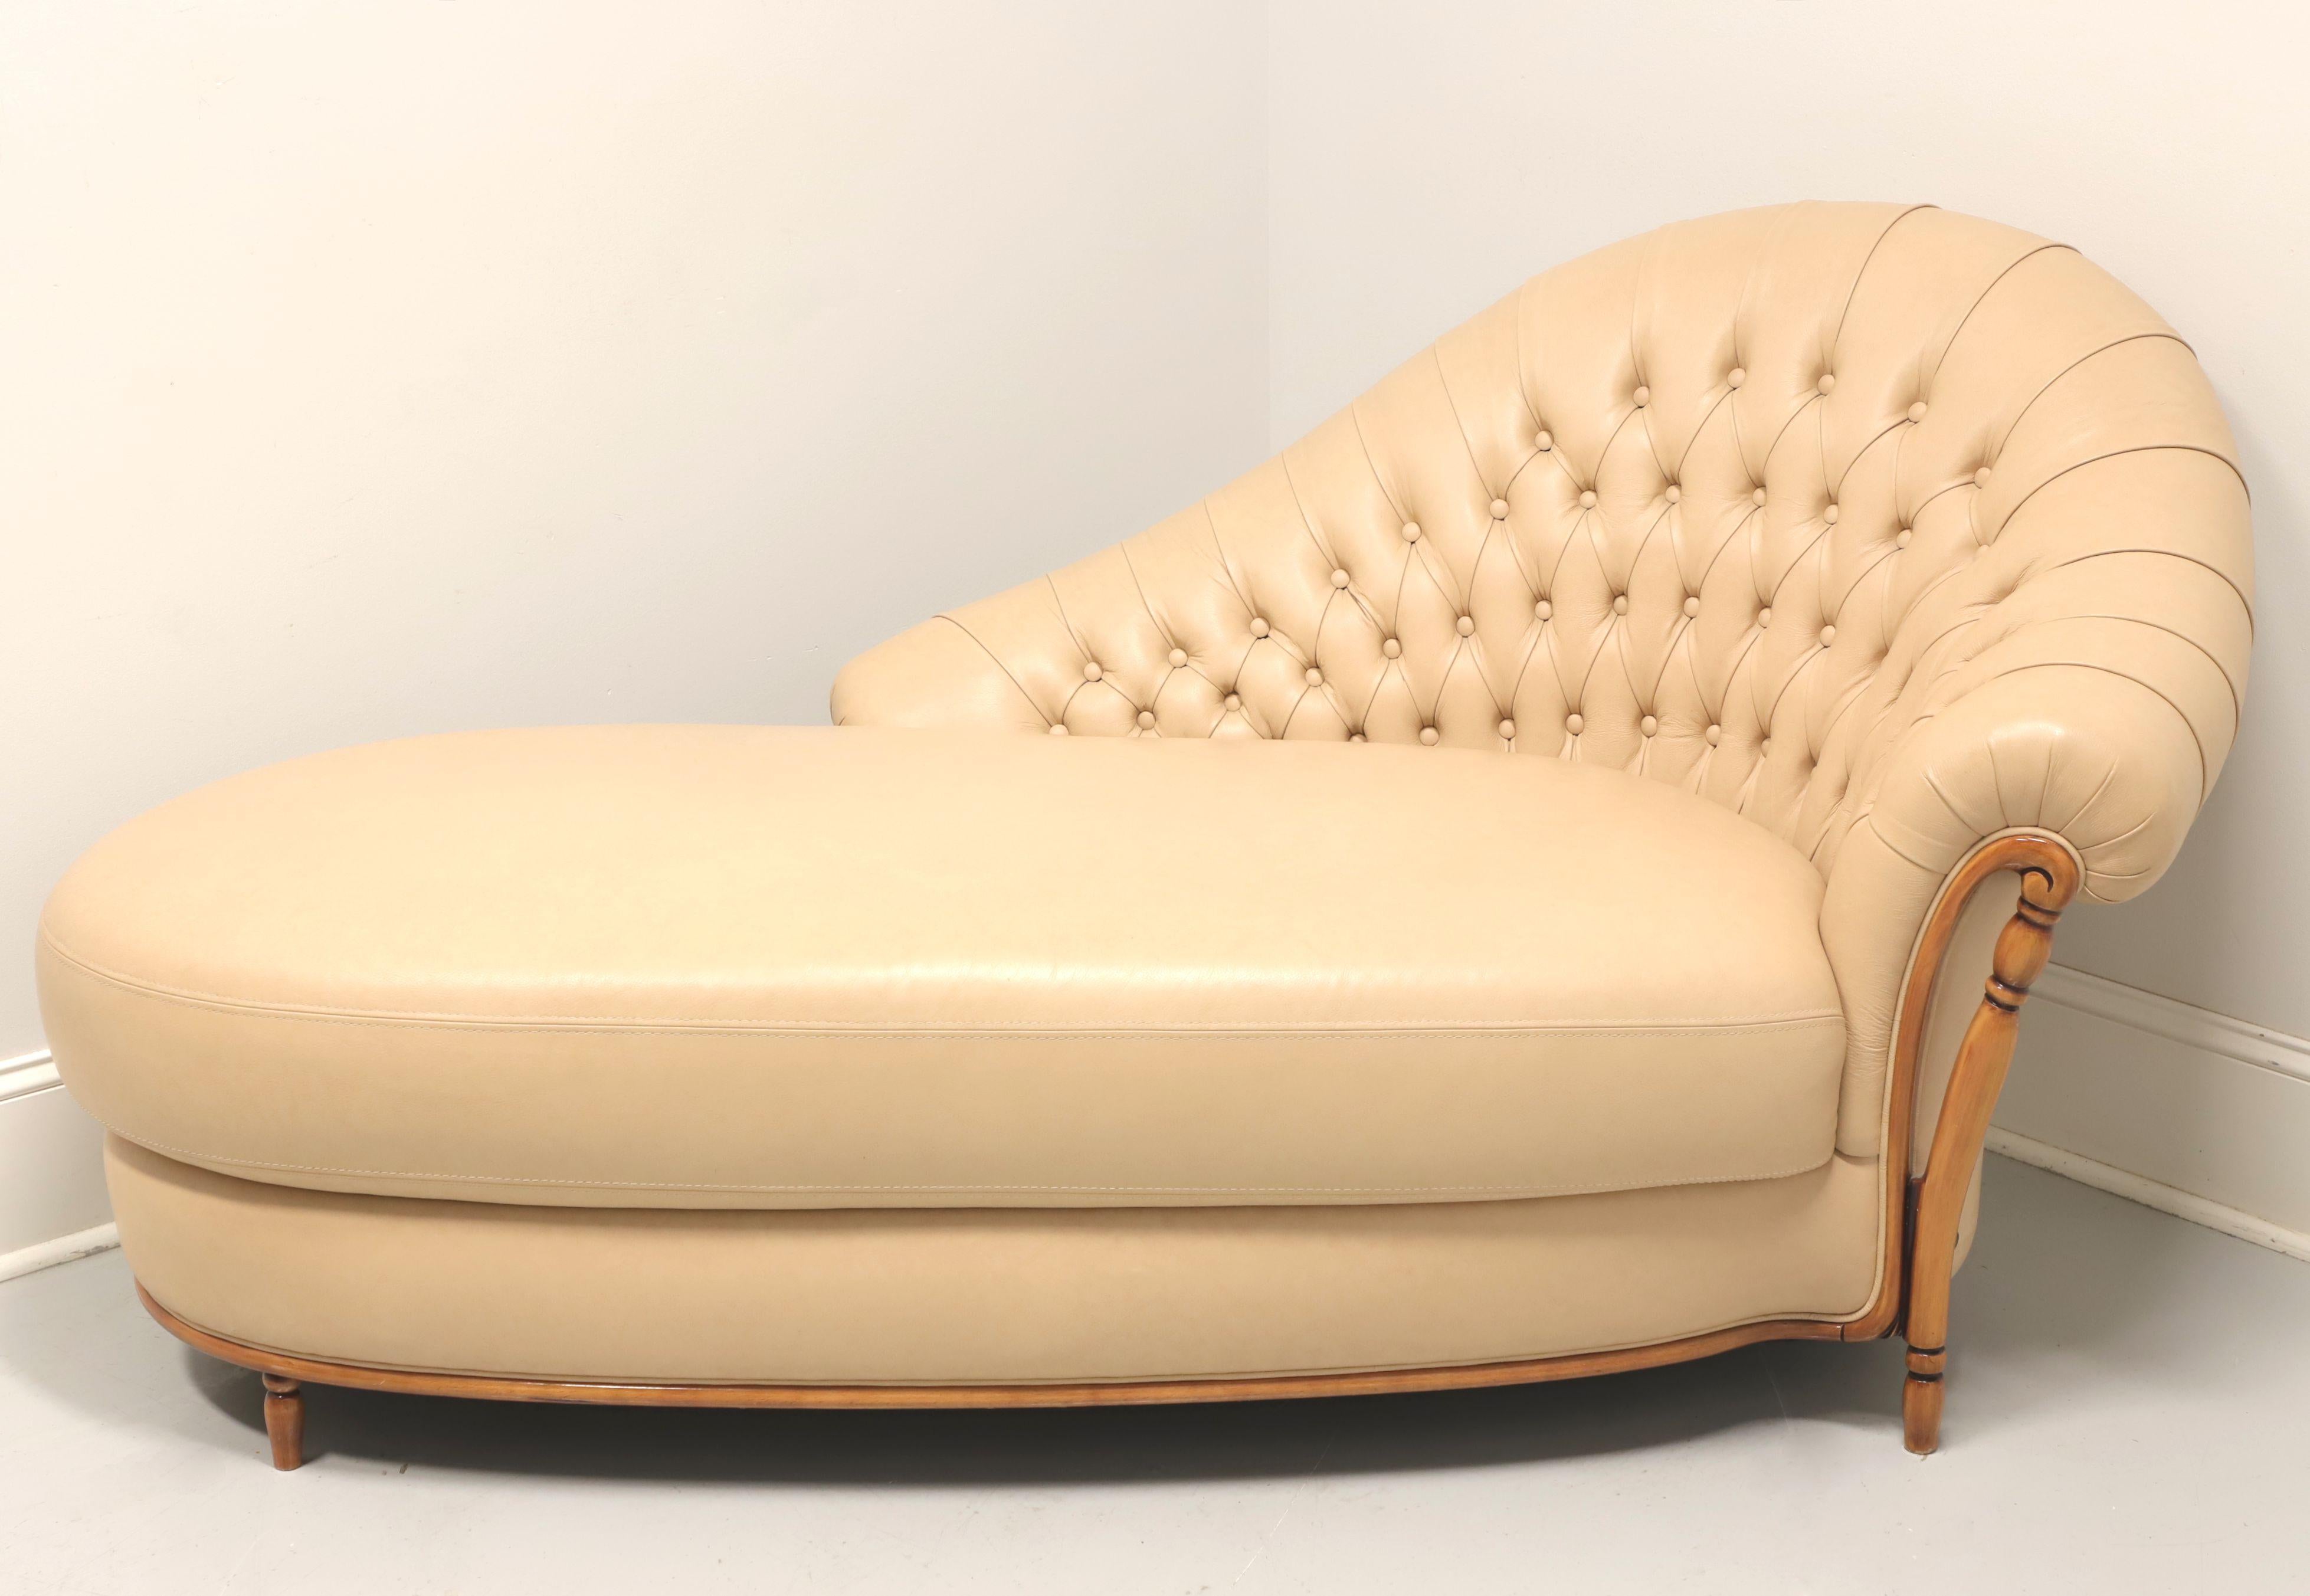 A Regency Style tufted chaise lounge by Borzalino. Genuine leather in a light tan color with maple frame. Features a button tufted high corner back, rolled arm, rounded long lounge cushion, decorative maple trim to apron & arm and toupie feet.